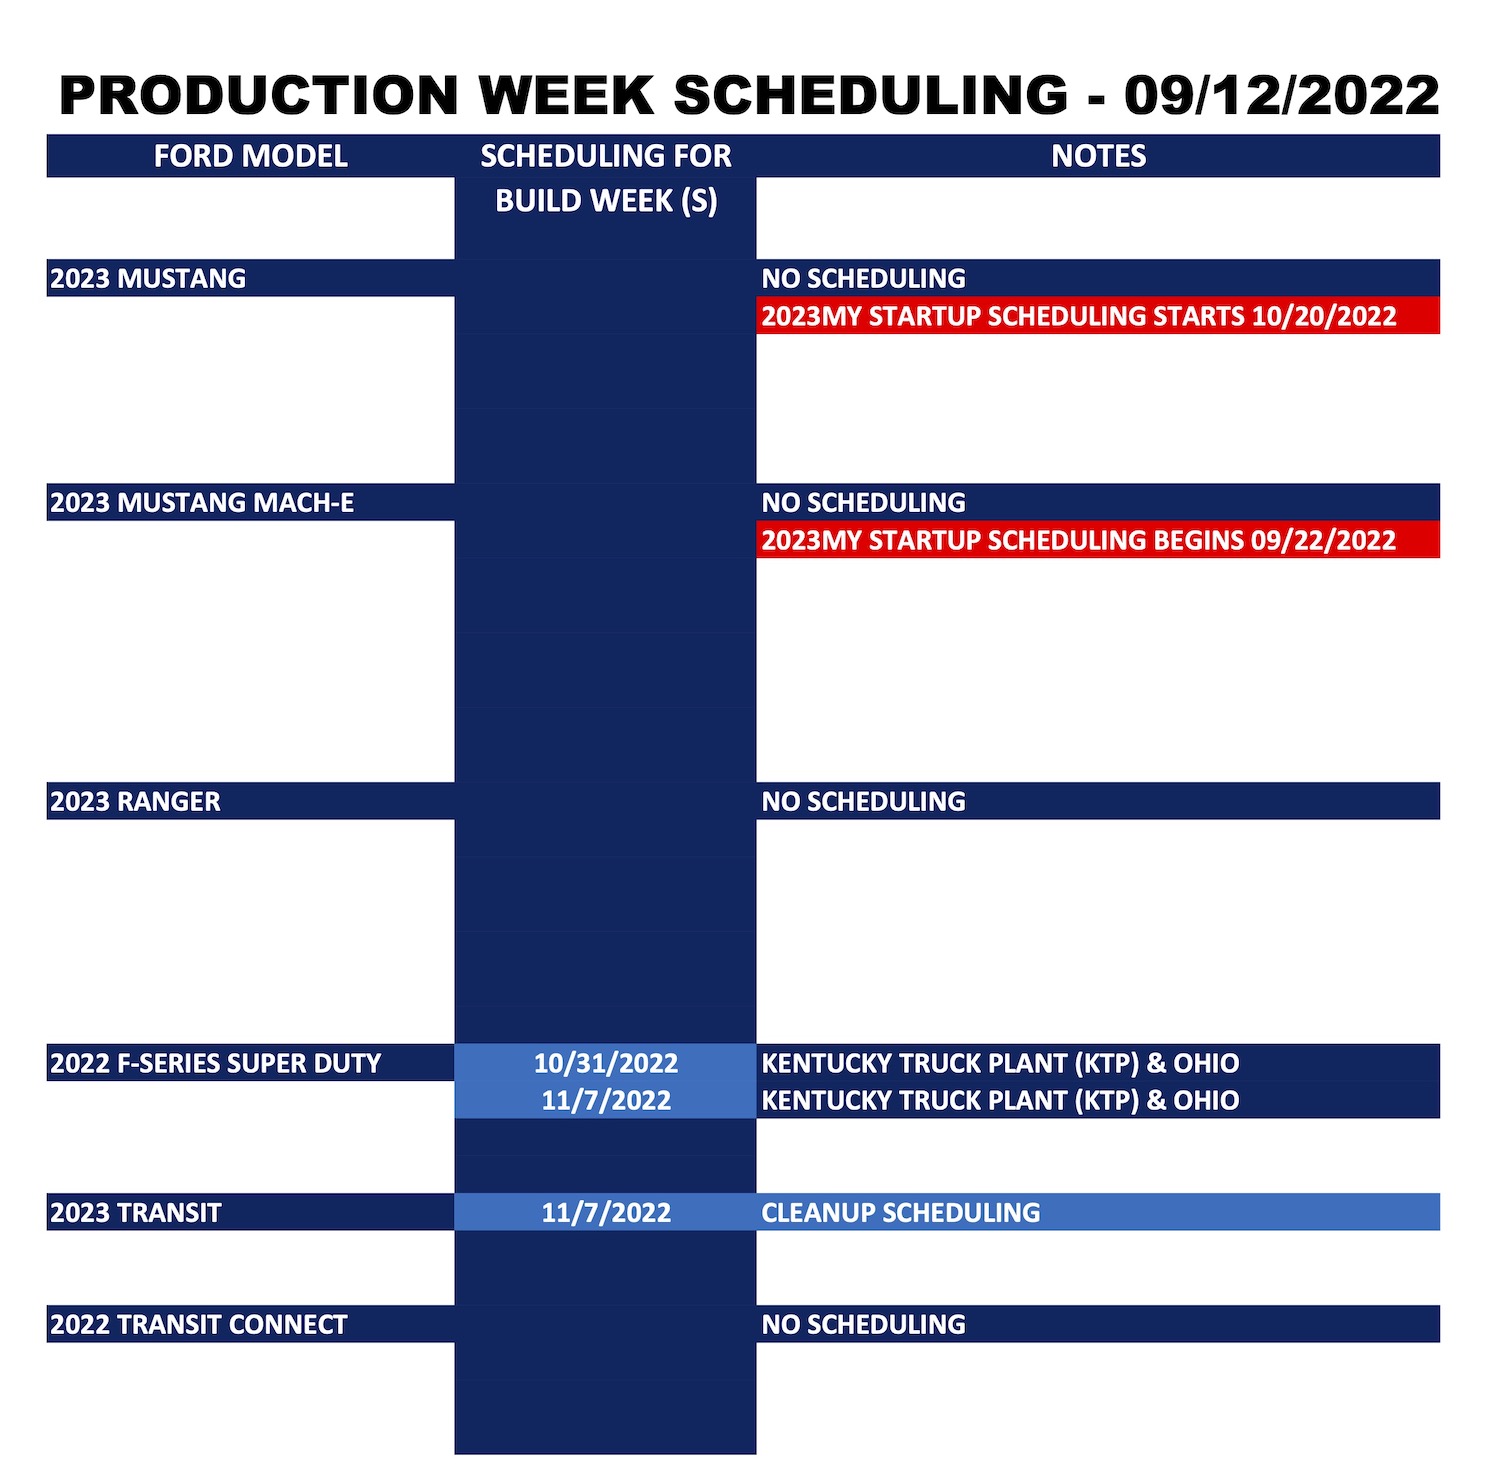 Ford_Forums_Production Week Scheduling_2022-09-12_2.jpg